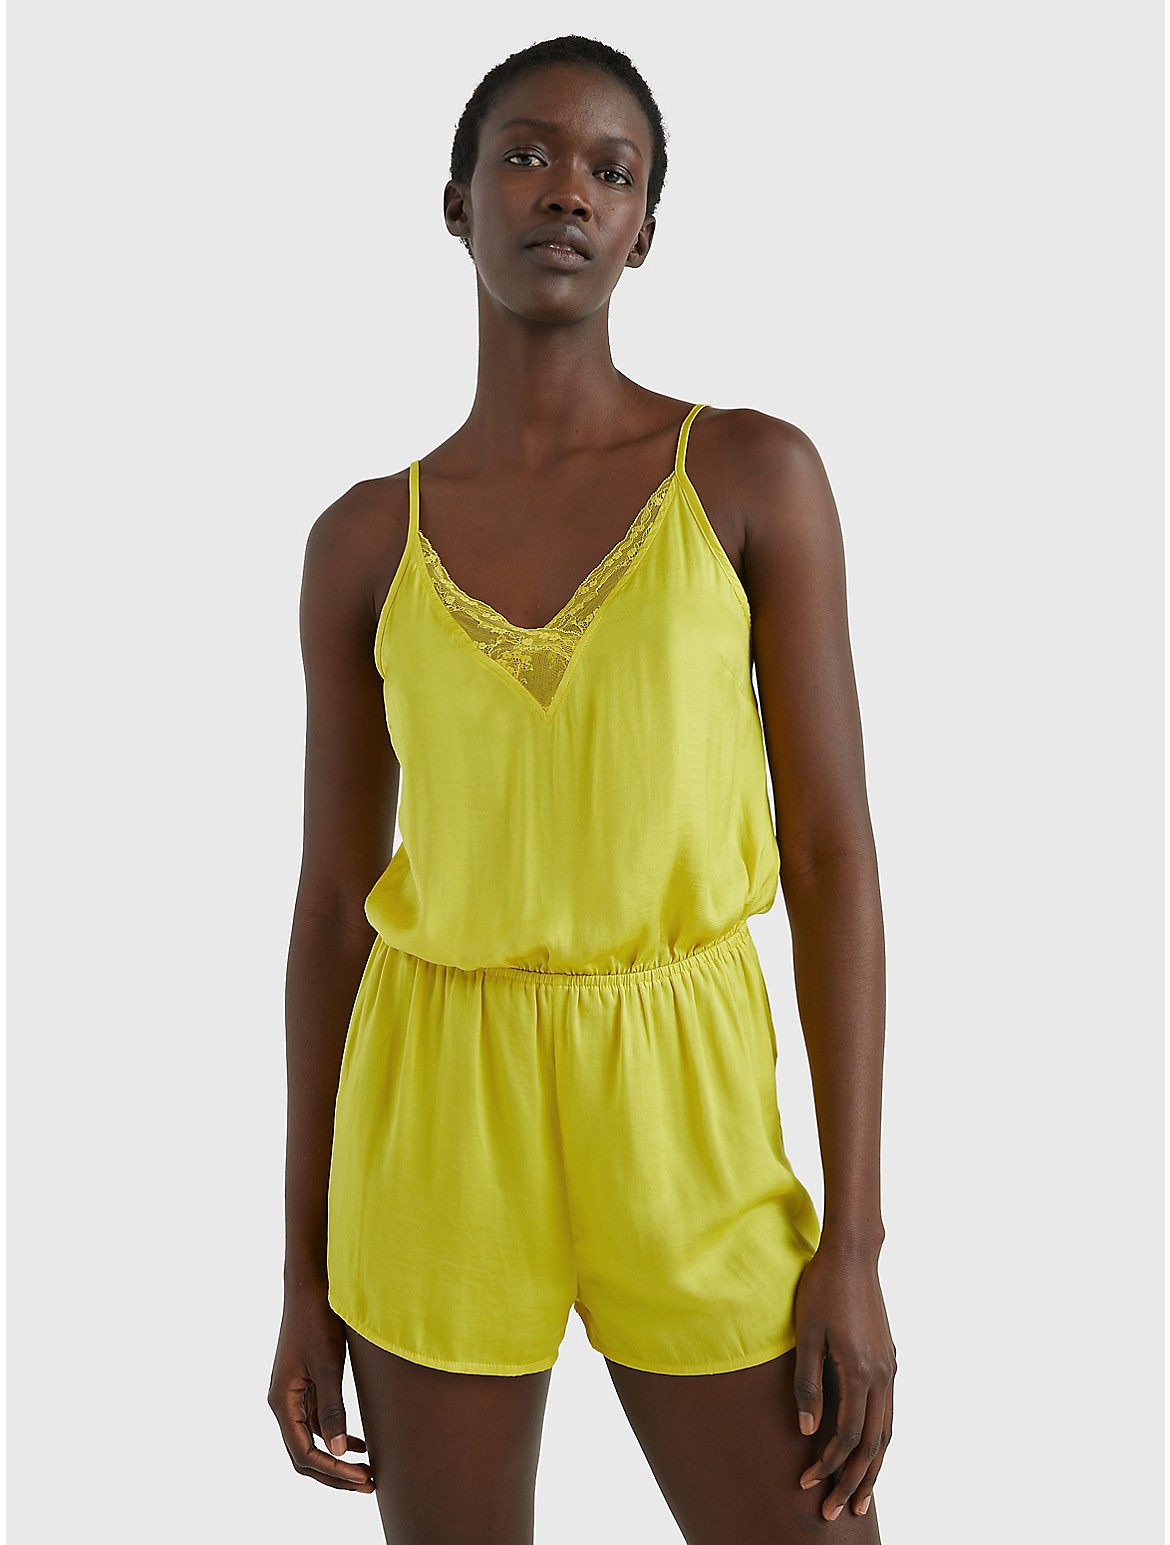 Tommy Hilfiger Women's Lace Cami Romper - Yellow - L